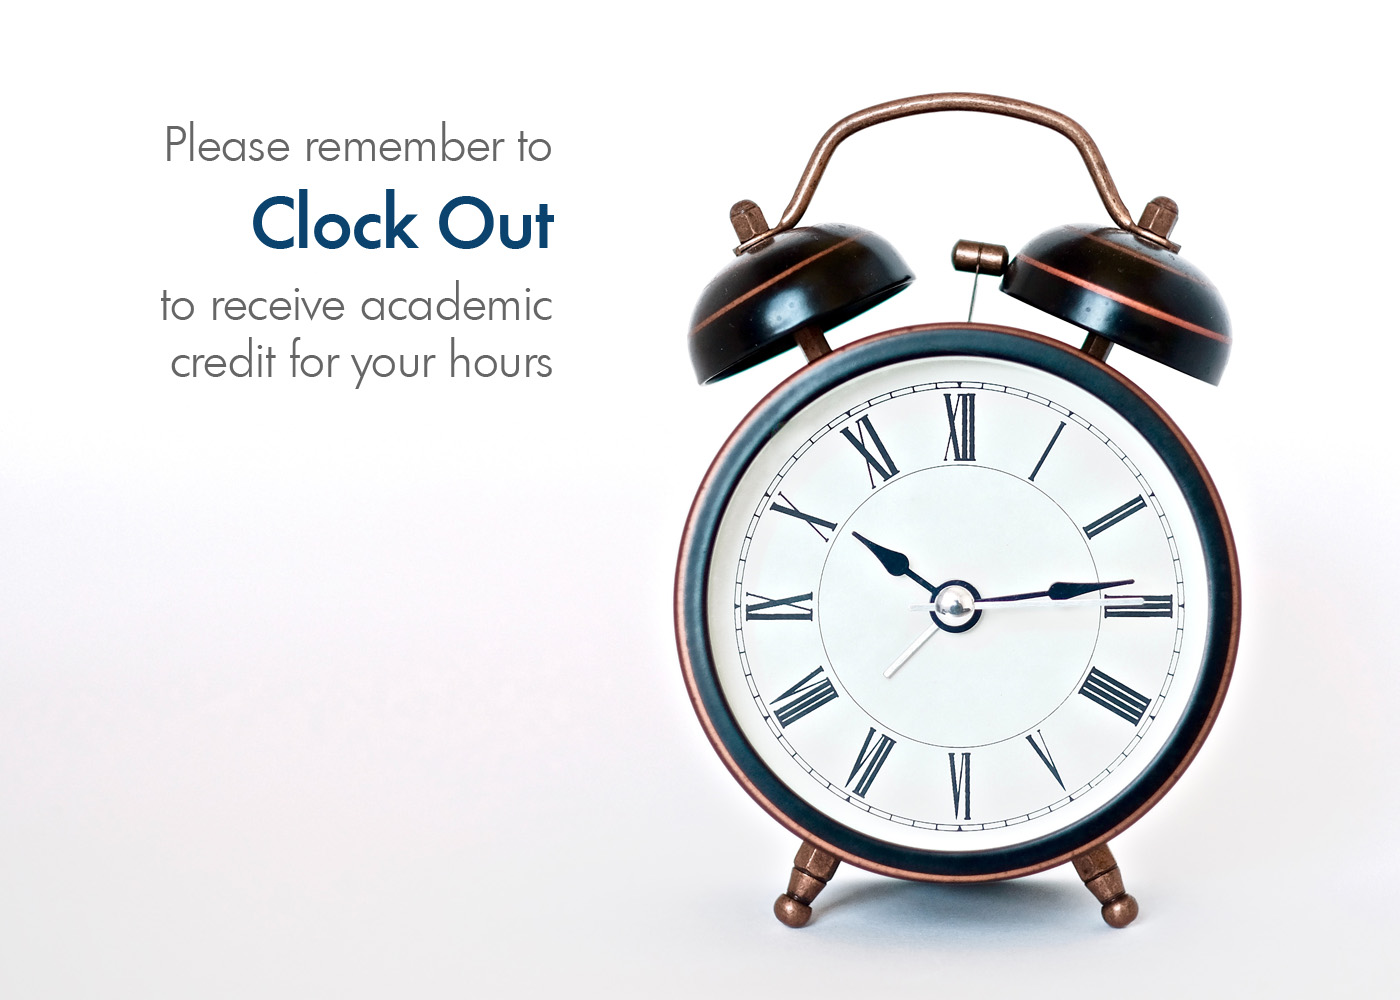 Students: Remember to clock out to receive academic credit for your hours